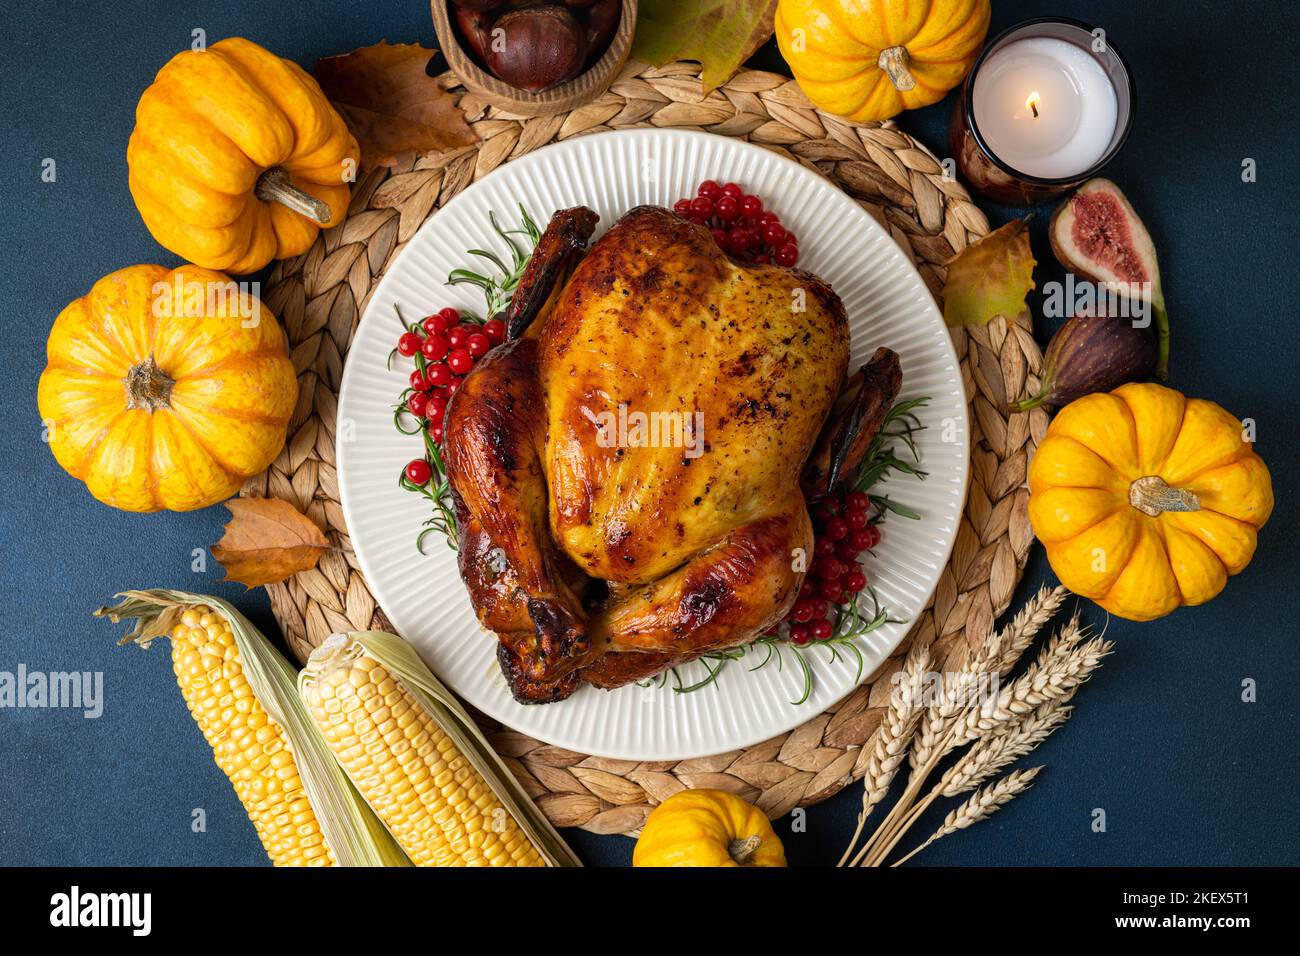 Roasted chicken for Thanksgiving Day. Cooked chicken or turkey with herb rosemary and berry and pumpkins for Thanksgiving dinner on dark table. Festiv Stock Photo